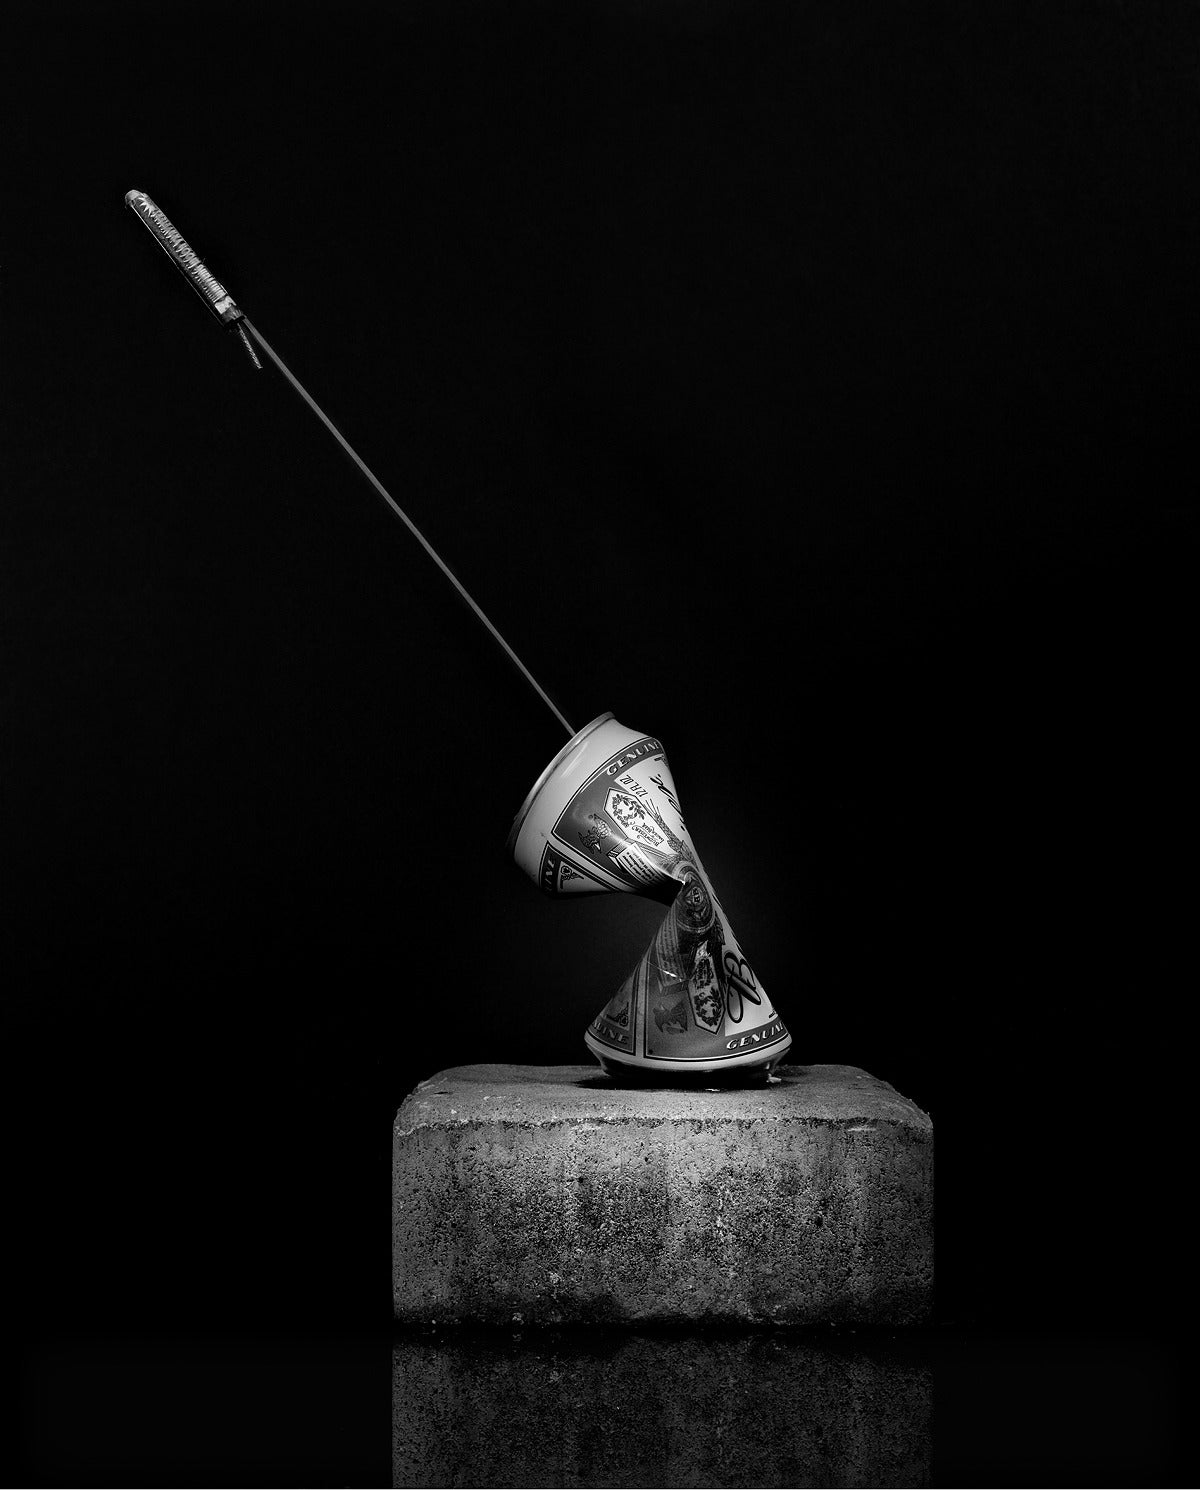 Michael Massaia Black and White Photograph - Quiet Now: Beer Can & Bottle Rocket